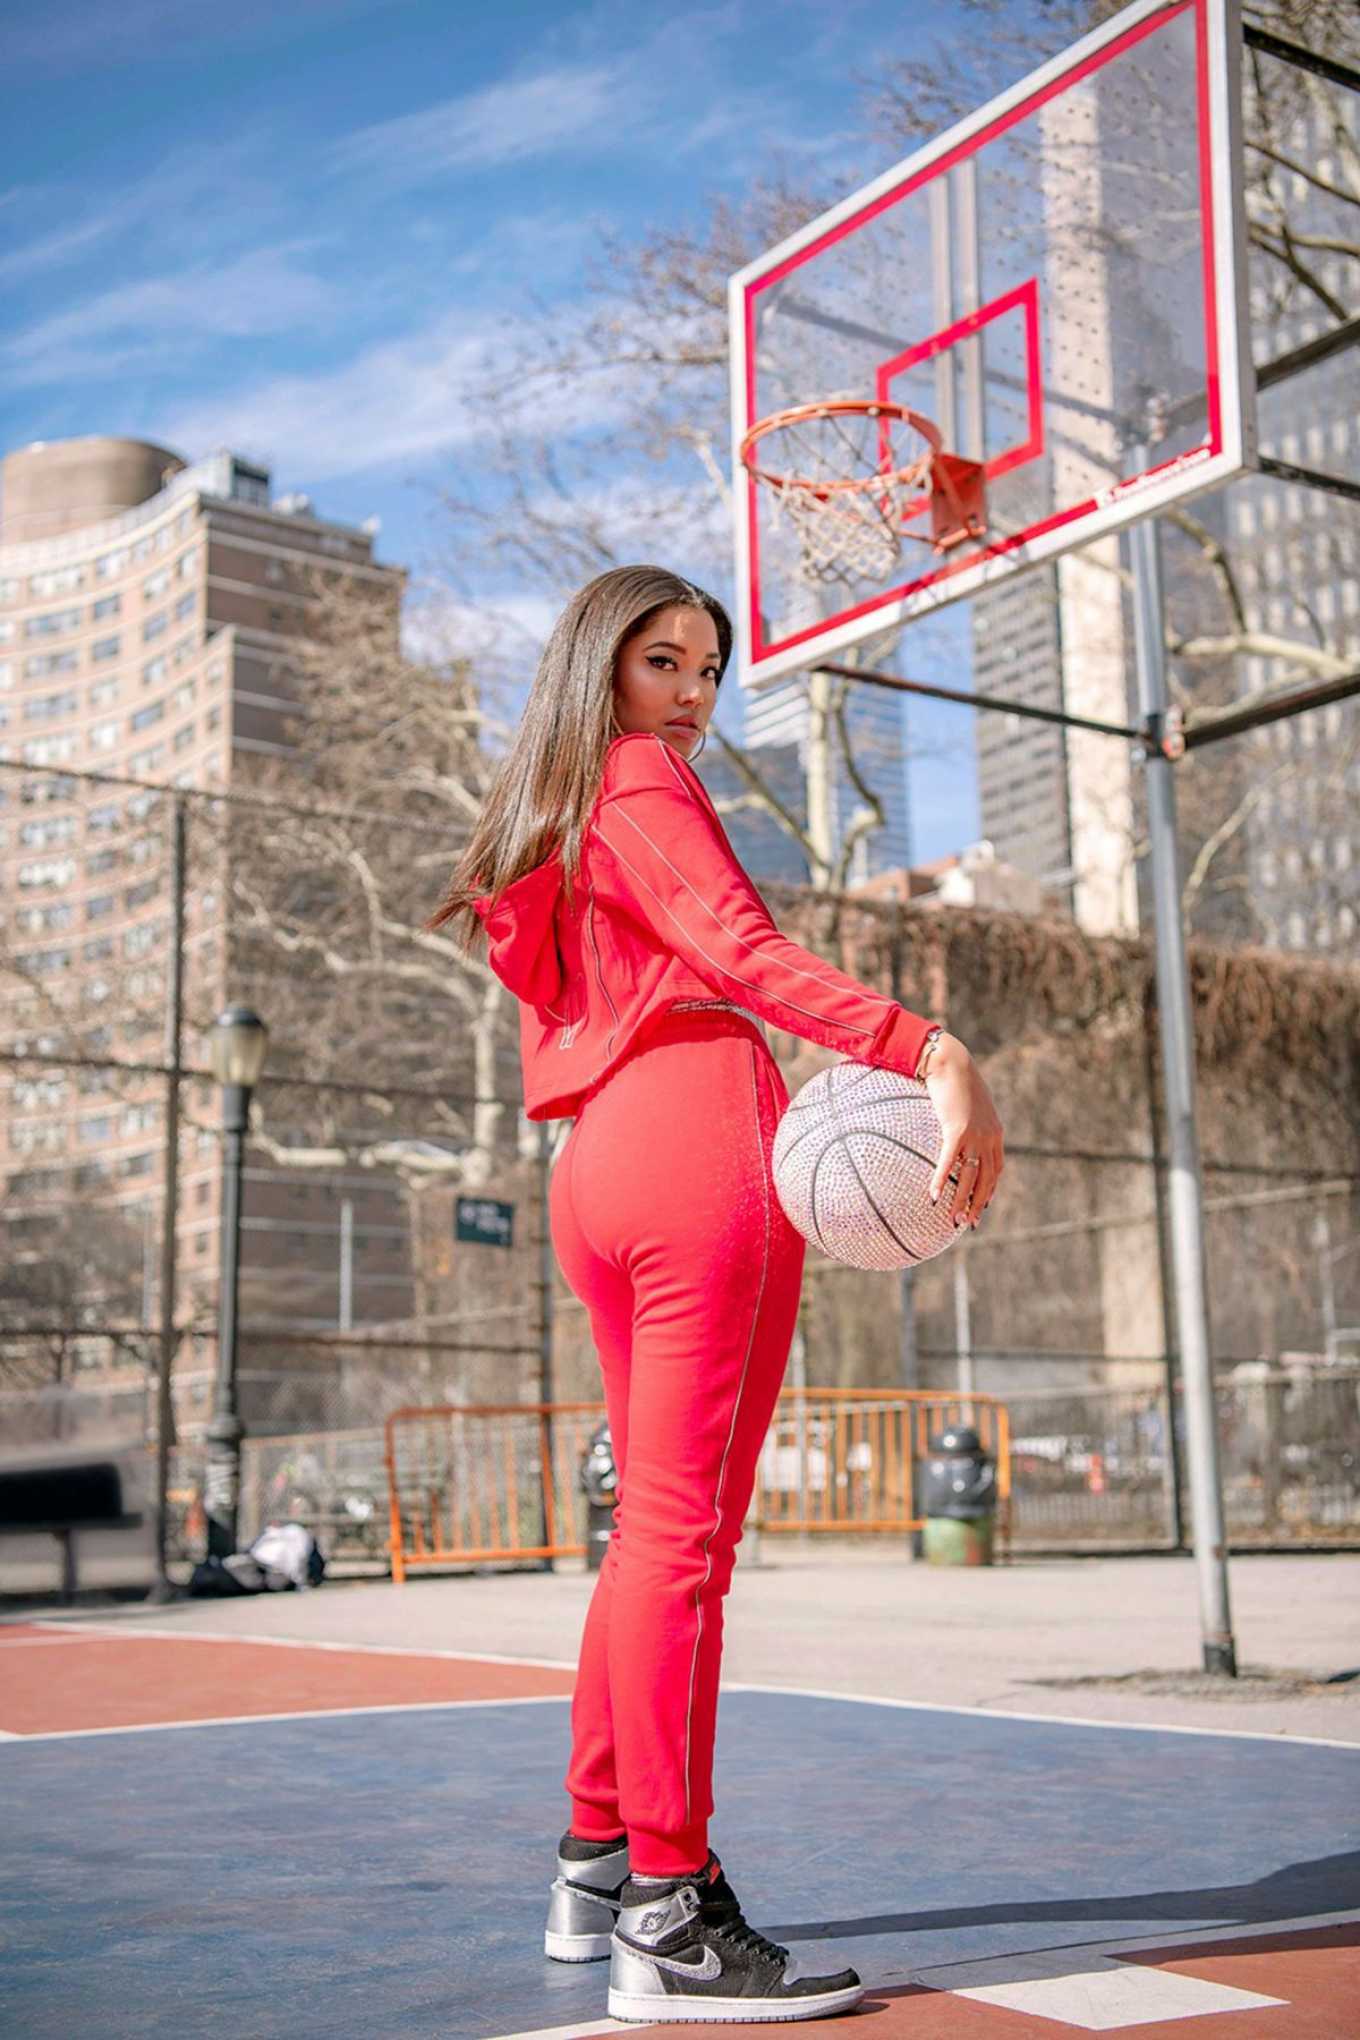 Ming Lee Simmons â€“ Photoshoot for Her Collection in Collaboration with Foot Locker